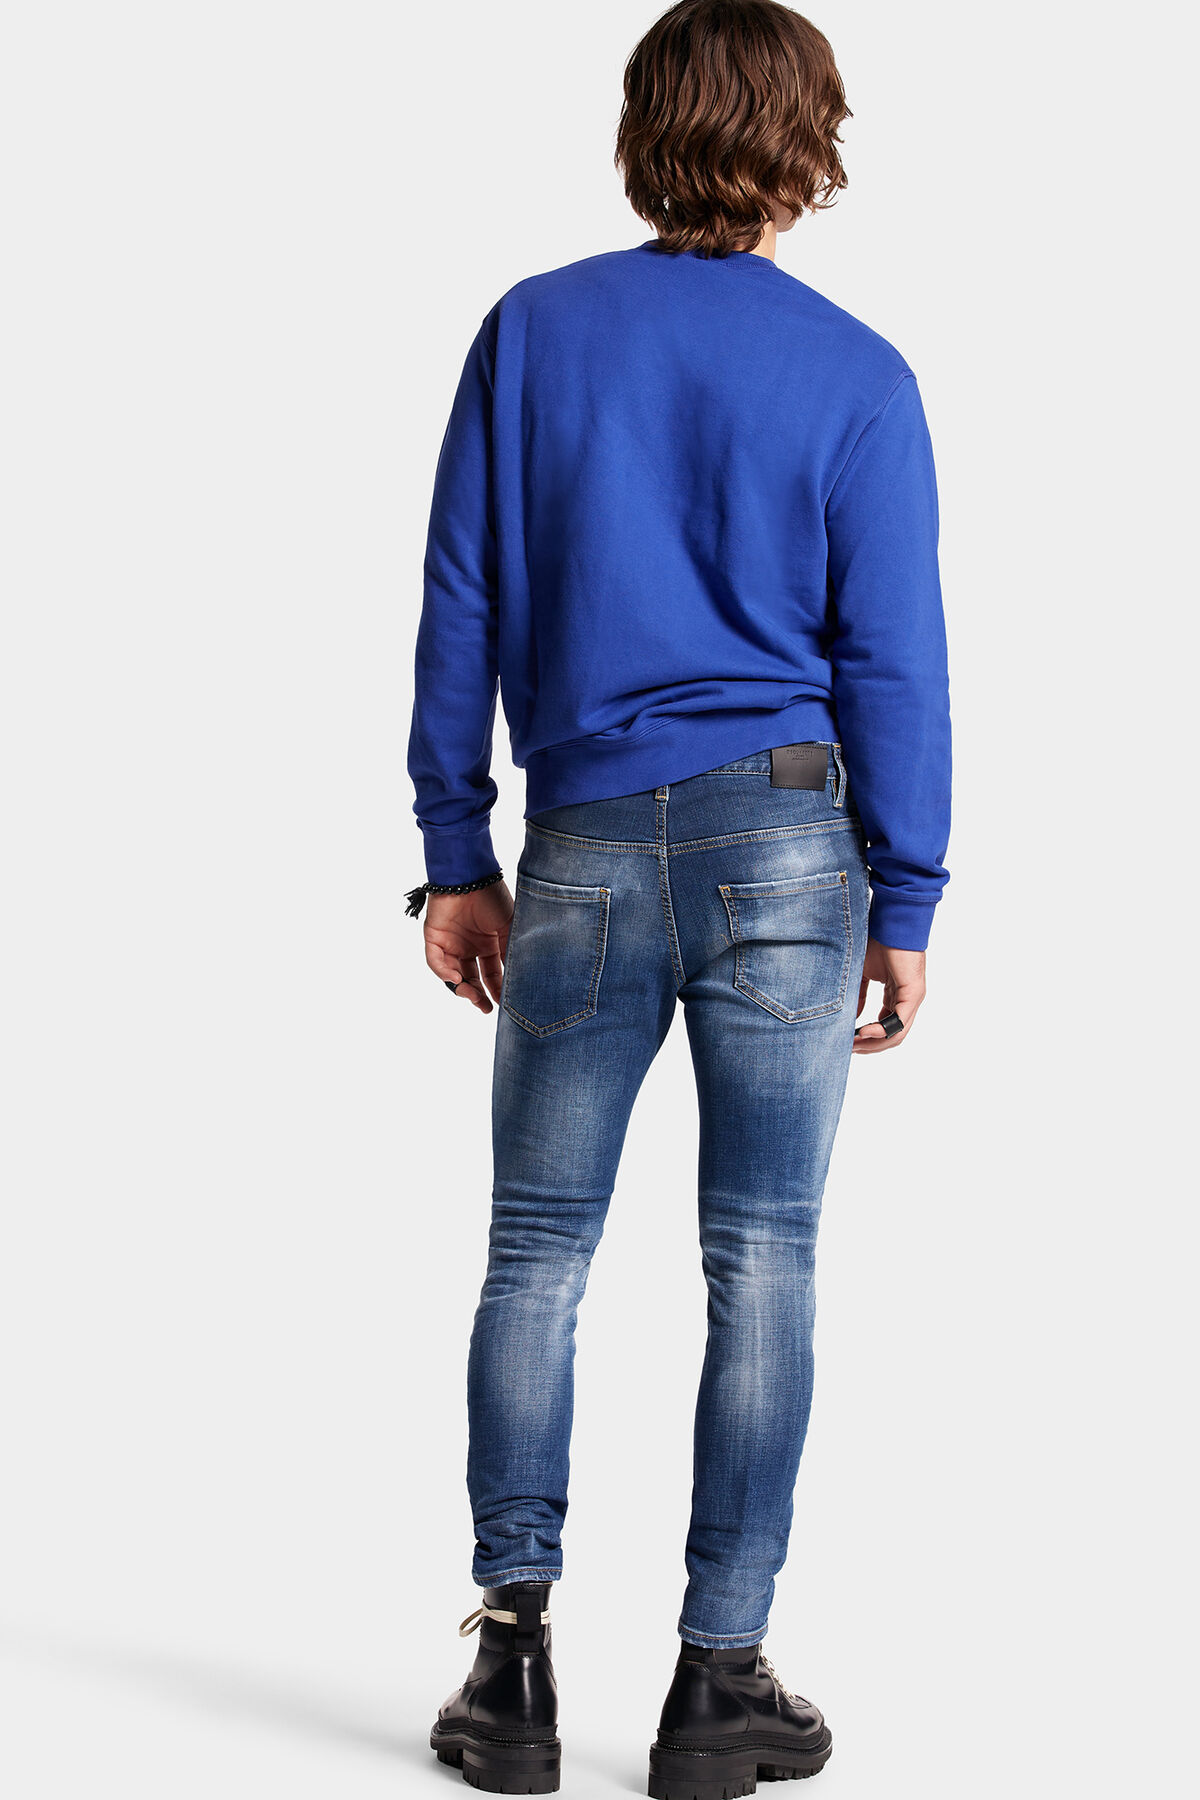 DSQUARED2 Jeans Skater in Washed Blue 50